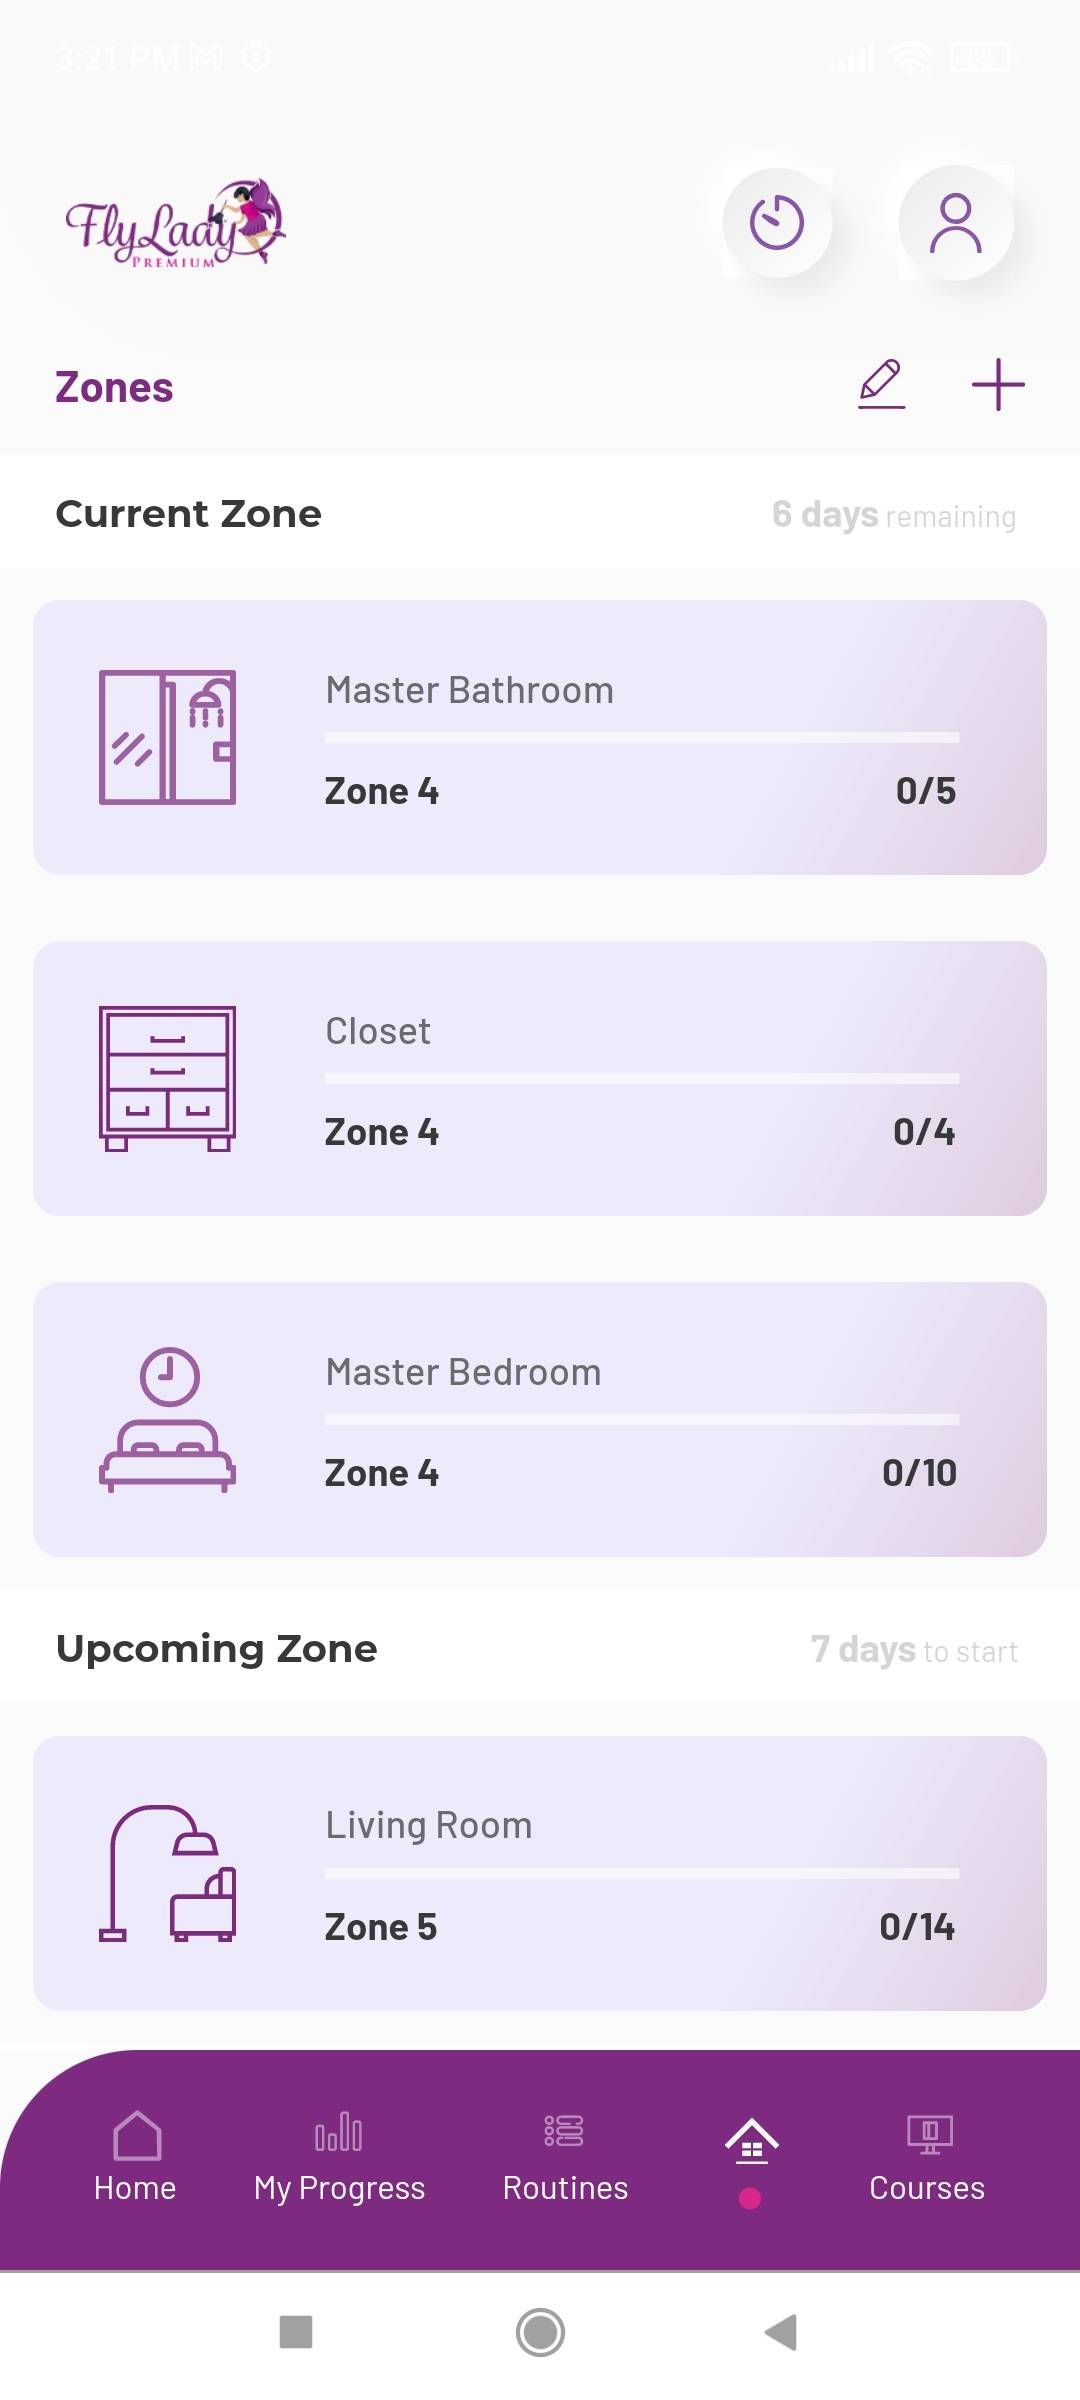 FlyLadyPlus divides your home into different zones and makes you tackle three different zones each week